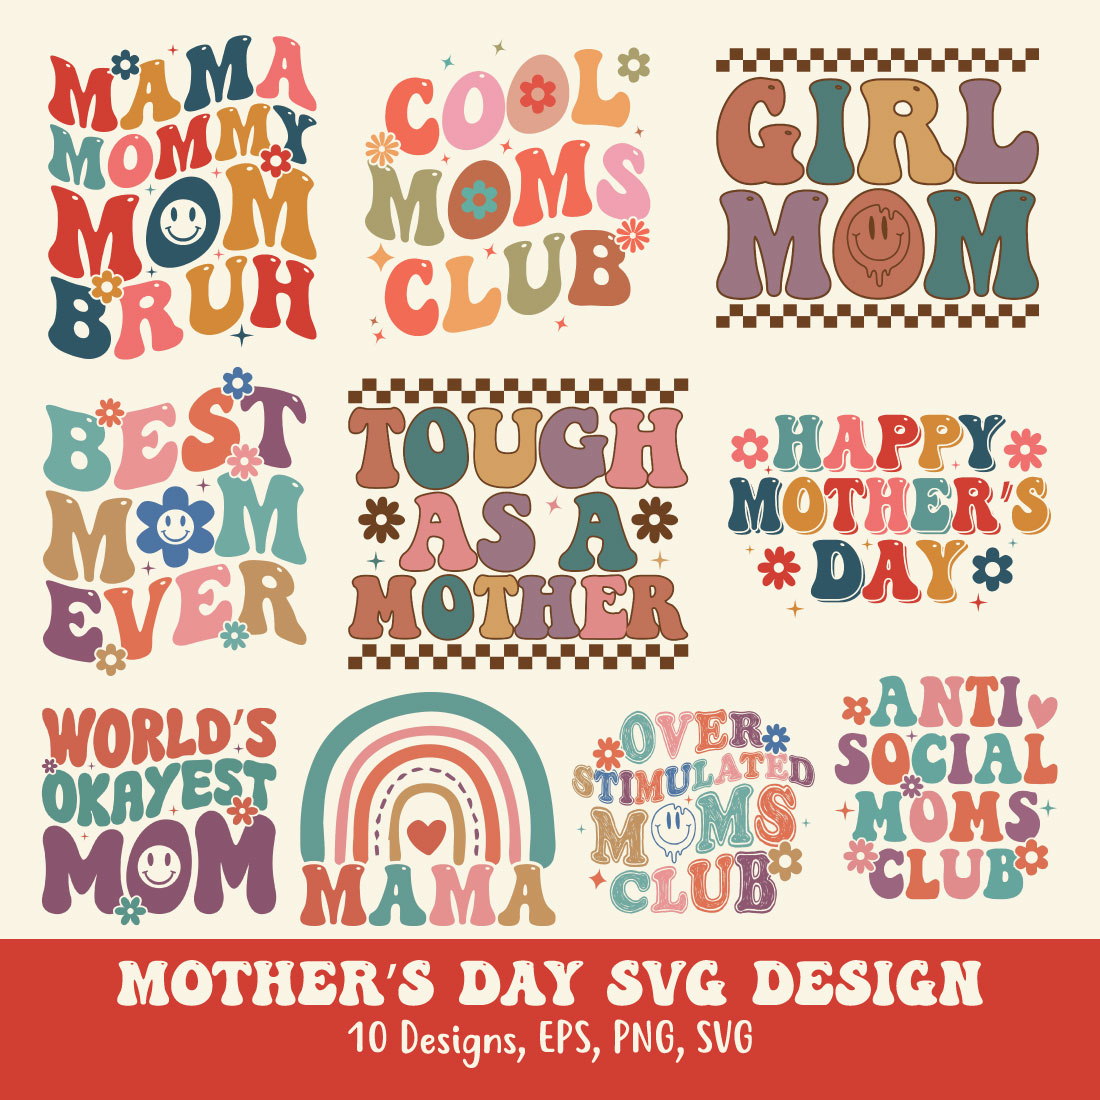 Happy Mother's Day svg vector for t-shirt - Buy t-shirt designs